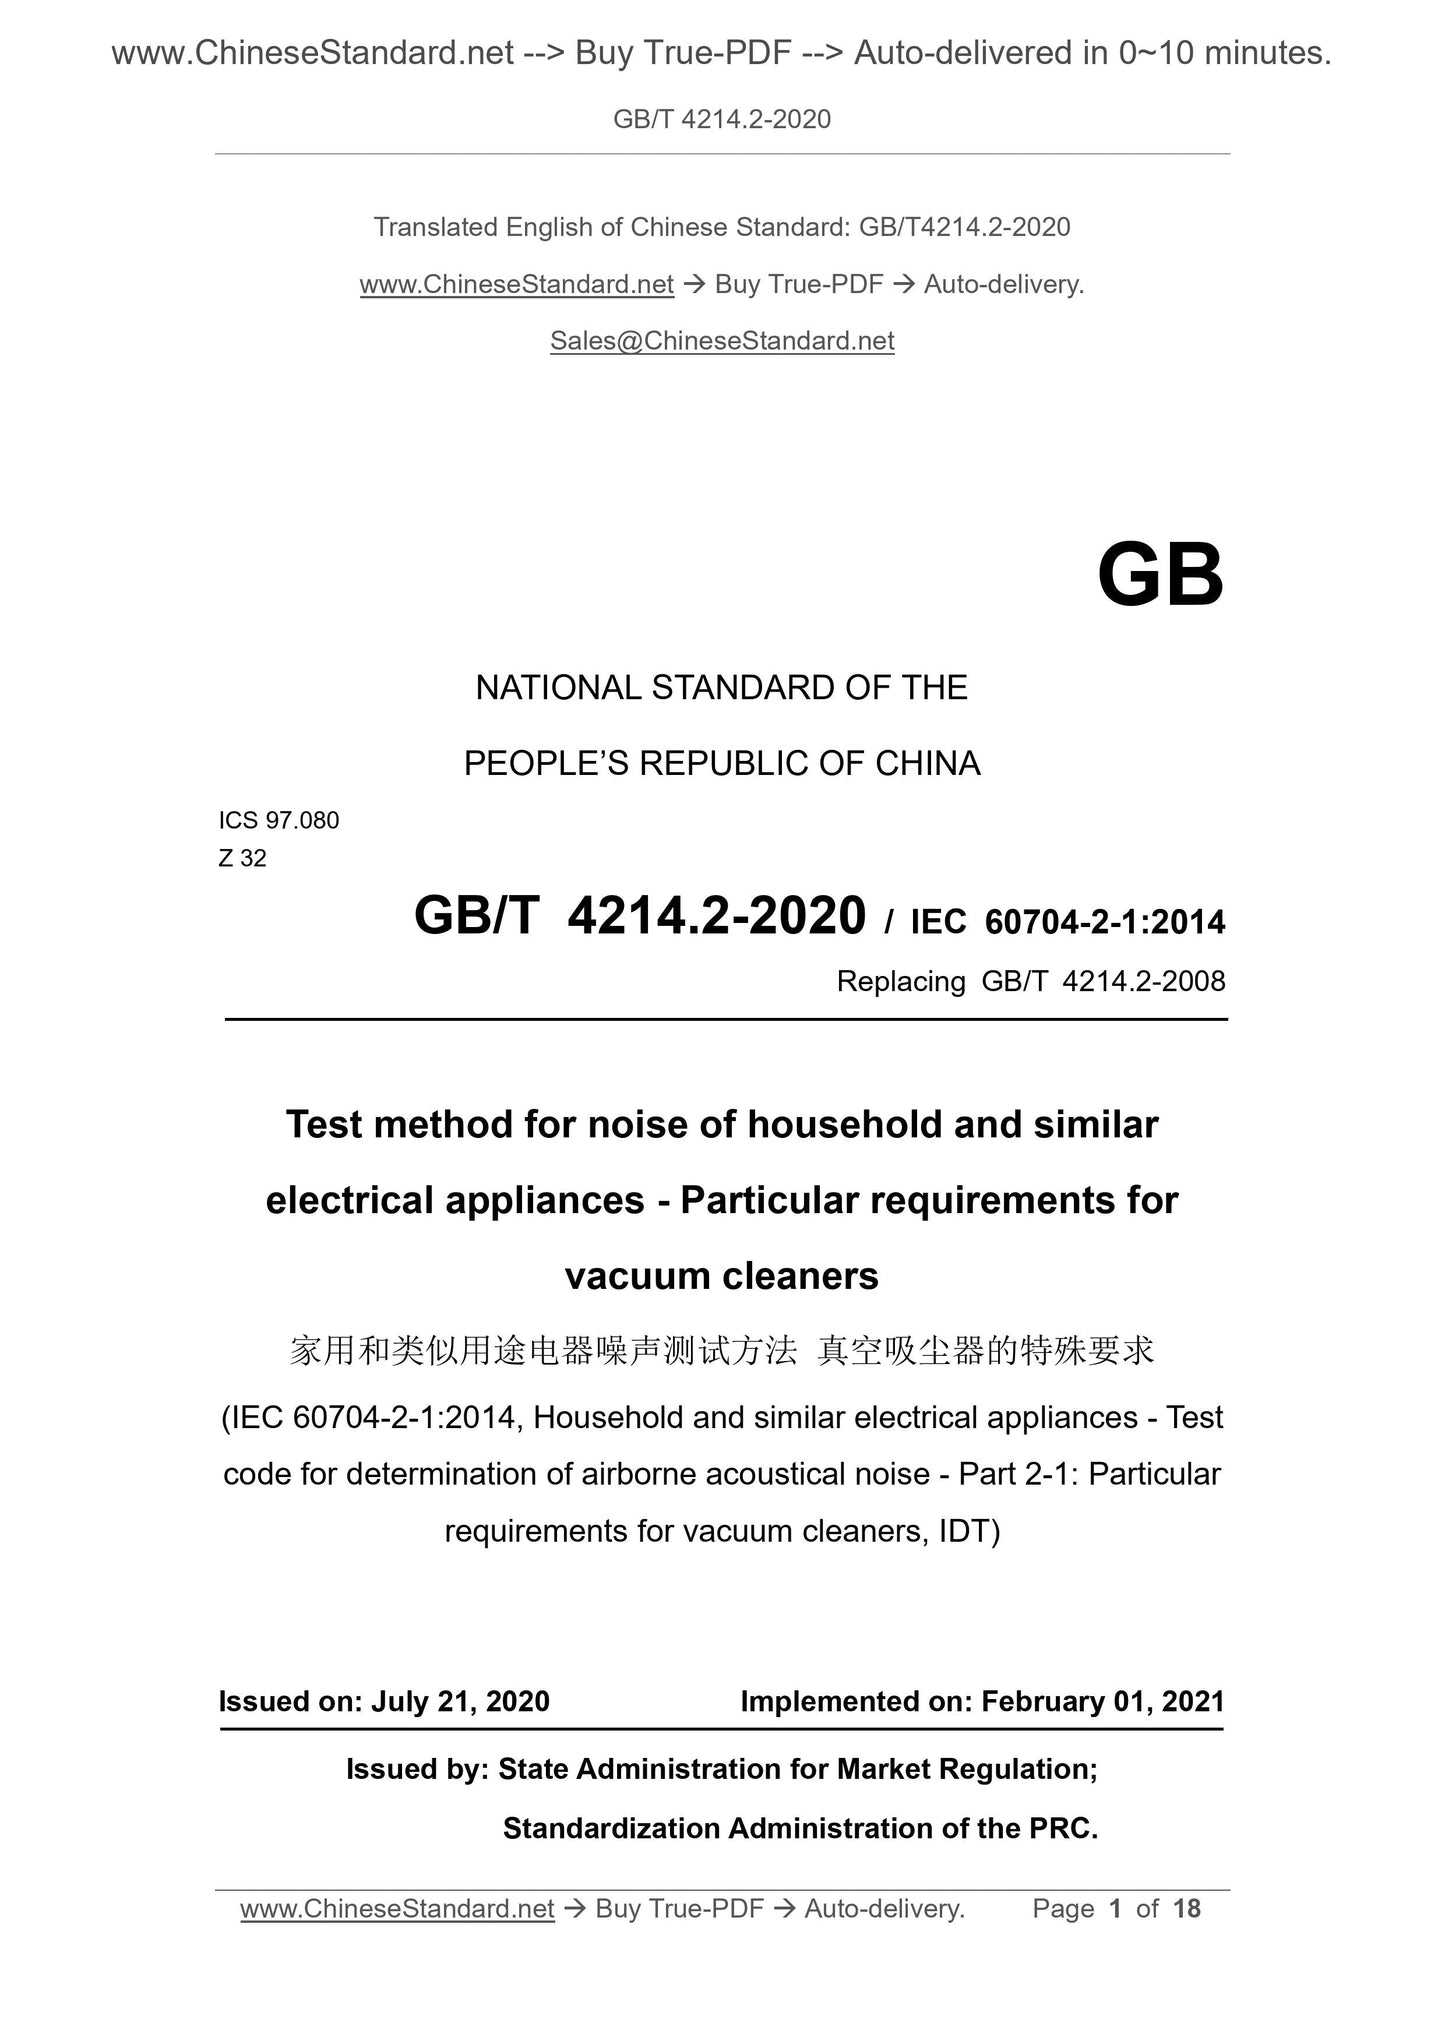 GB/T 4214.2-2020 Page 1